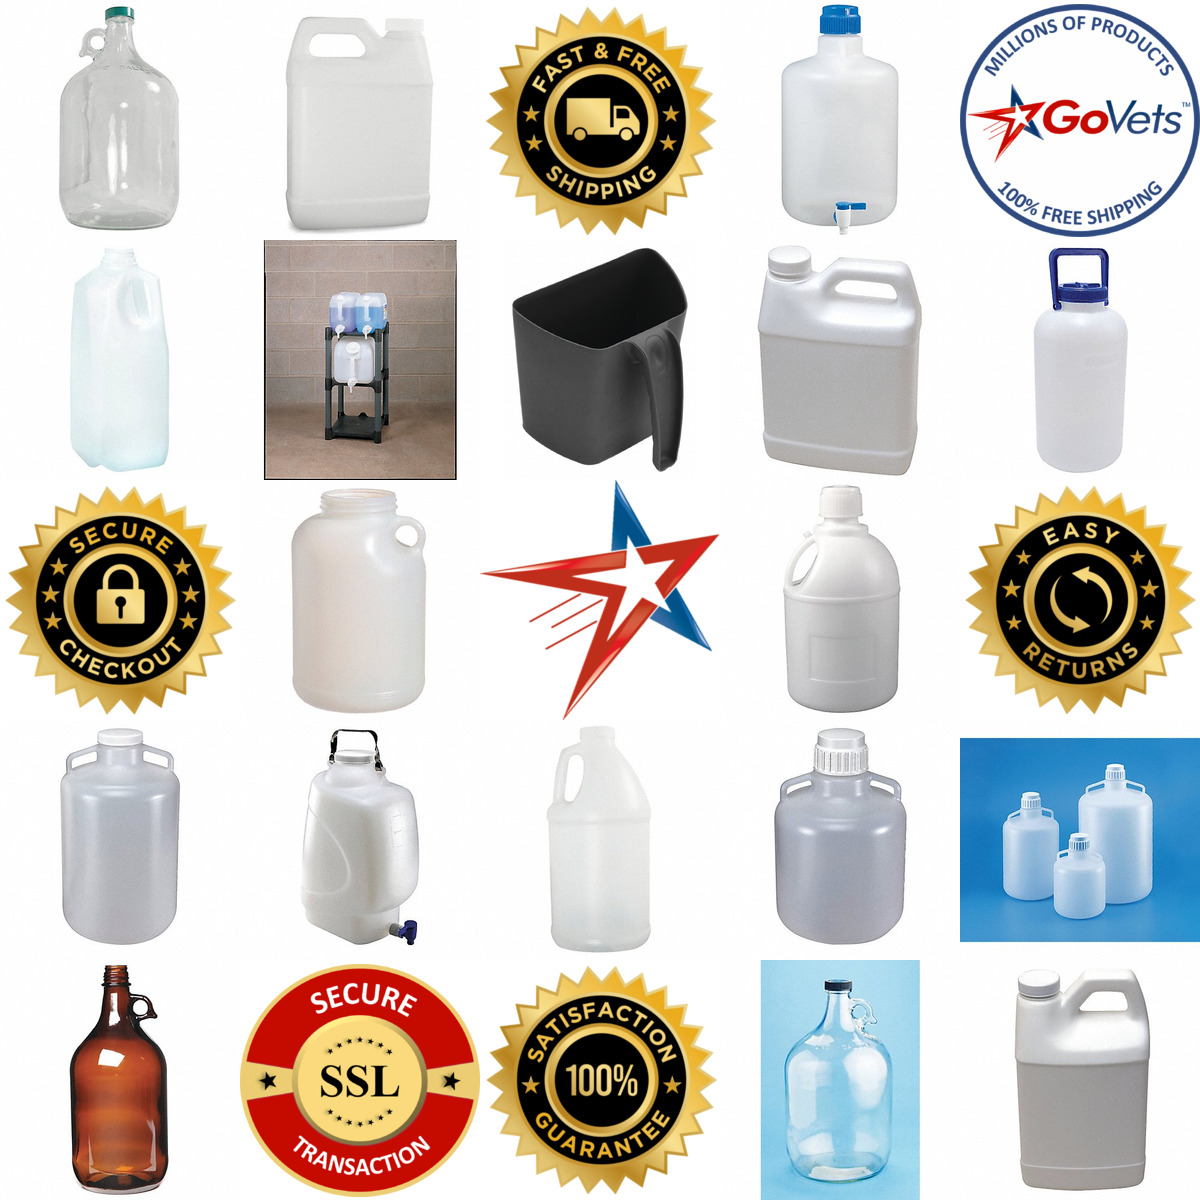 A selection of Carboys Jerricans and Jugs products on GoVets